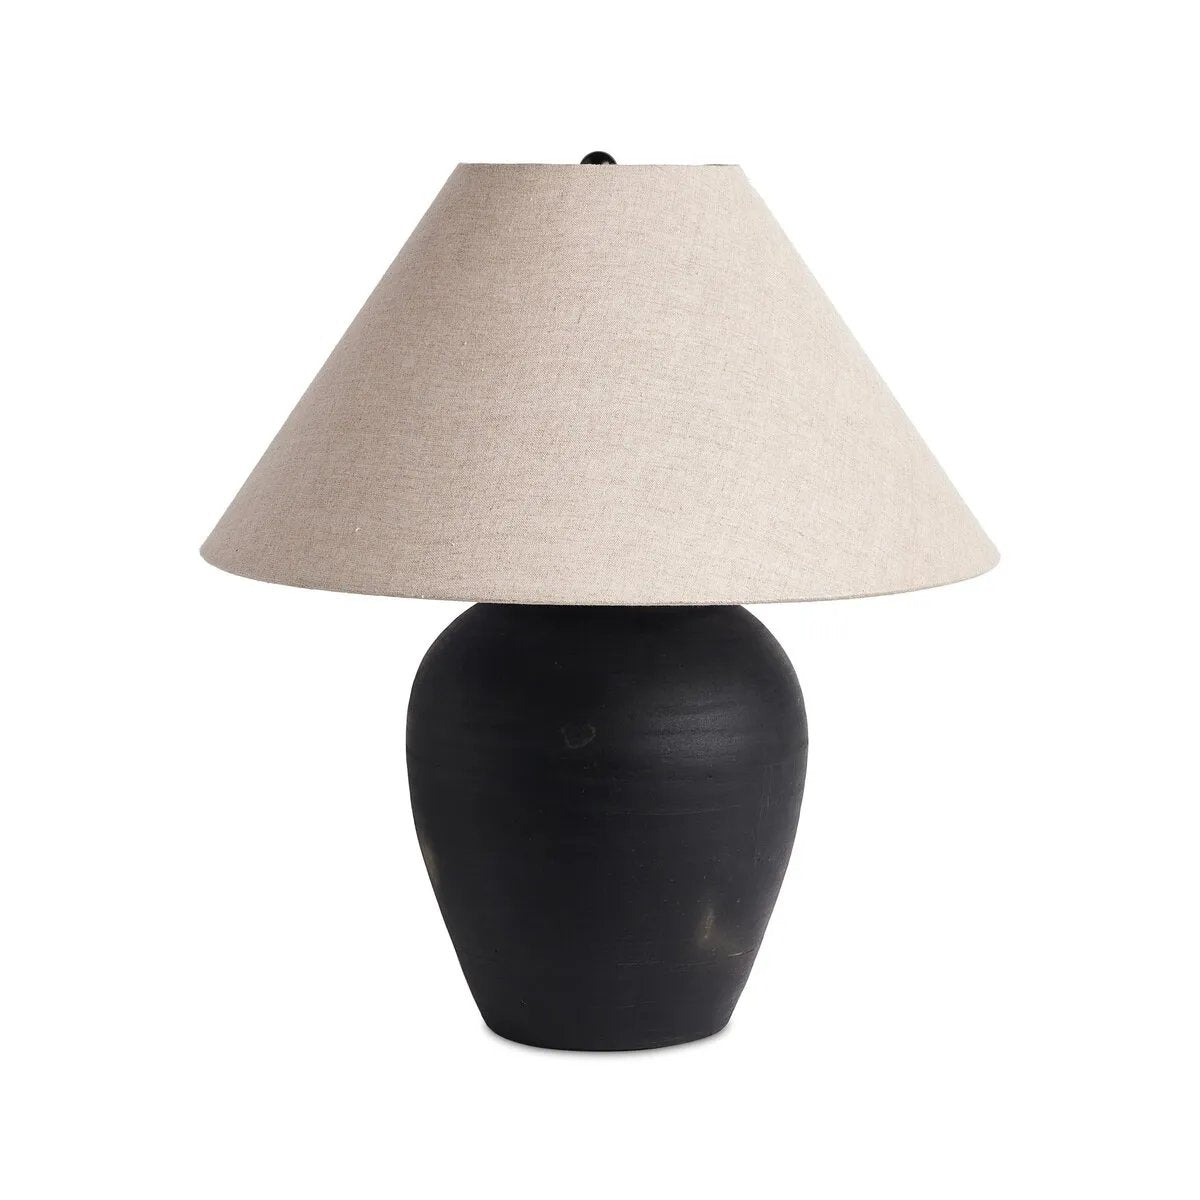 In this black terra cotta vase table lamp, each piece bears unique touches from its natural finishing process. Topped with a shade of natural linen, for a textural contrast.Collection: Rockwel Amethyst Home provides interior design, new home construction design consulting, vintage area rugs, and lighting in the Monterey metro area.